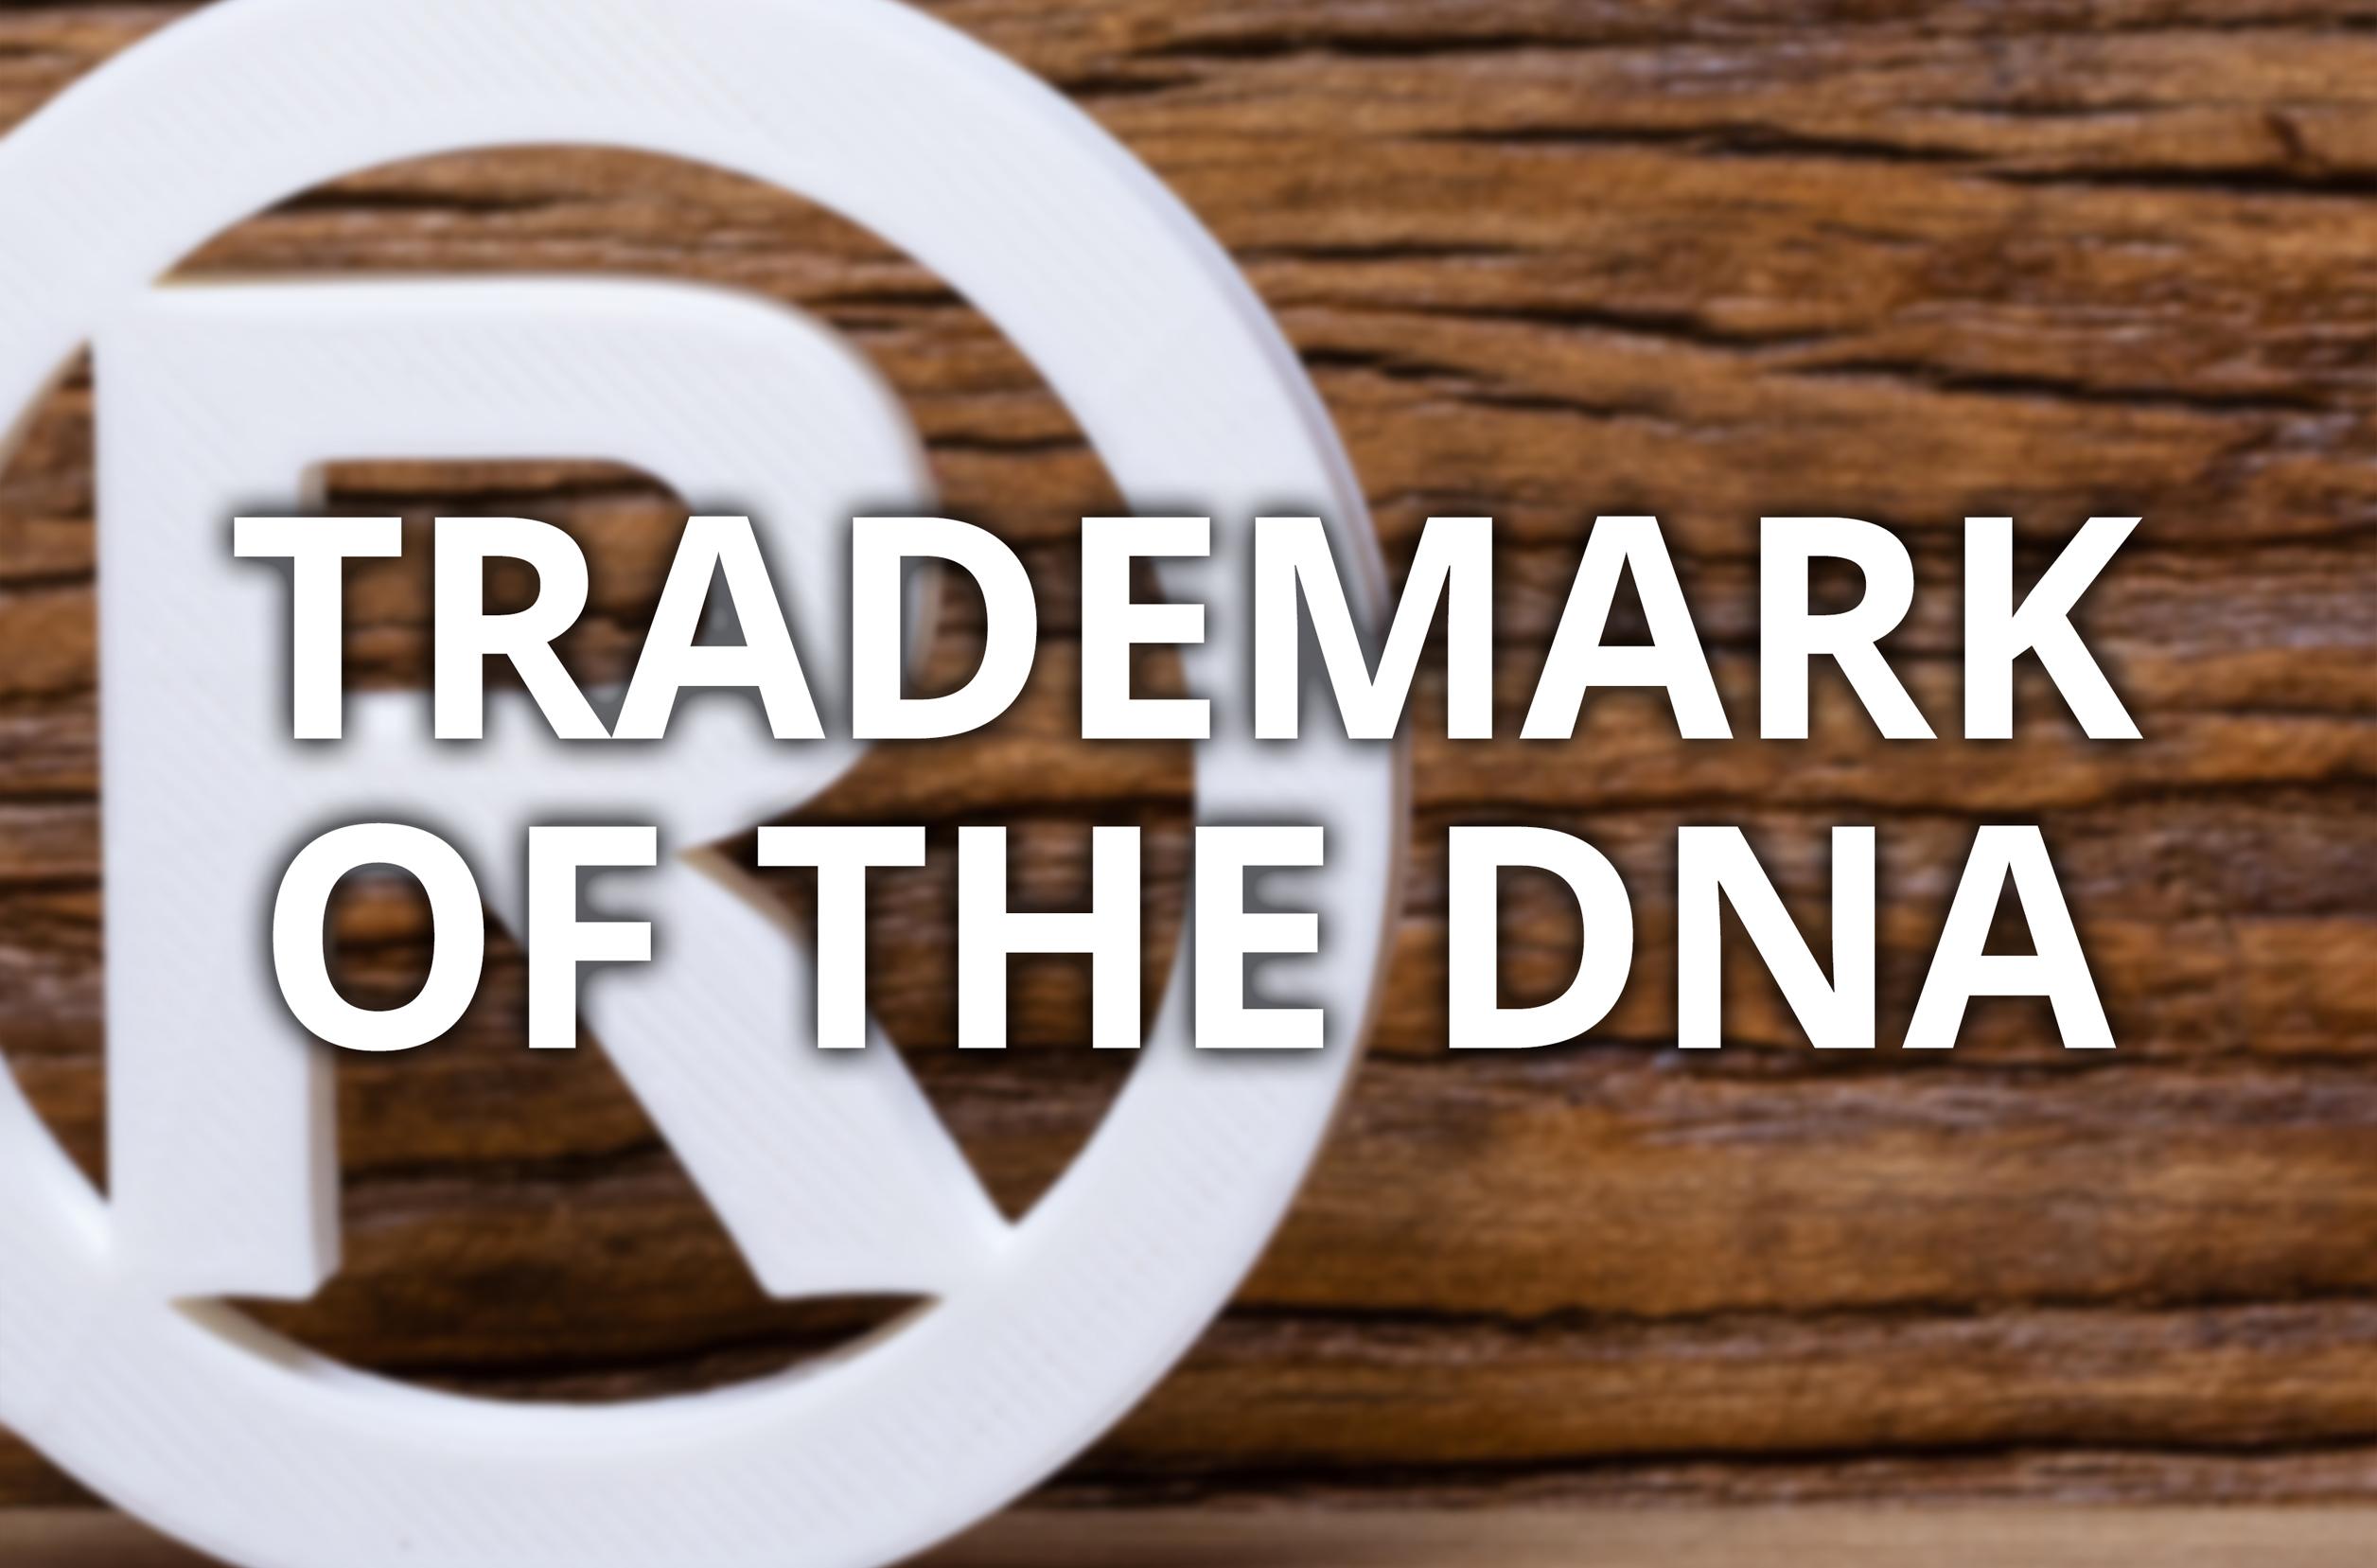 The Trademark of the DNA